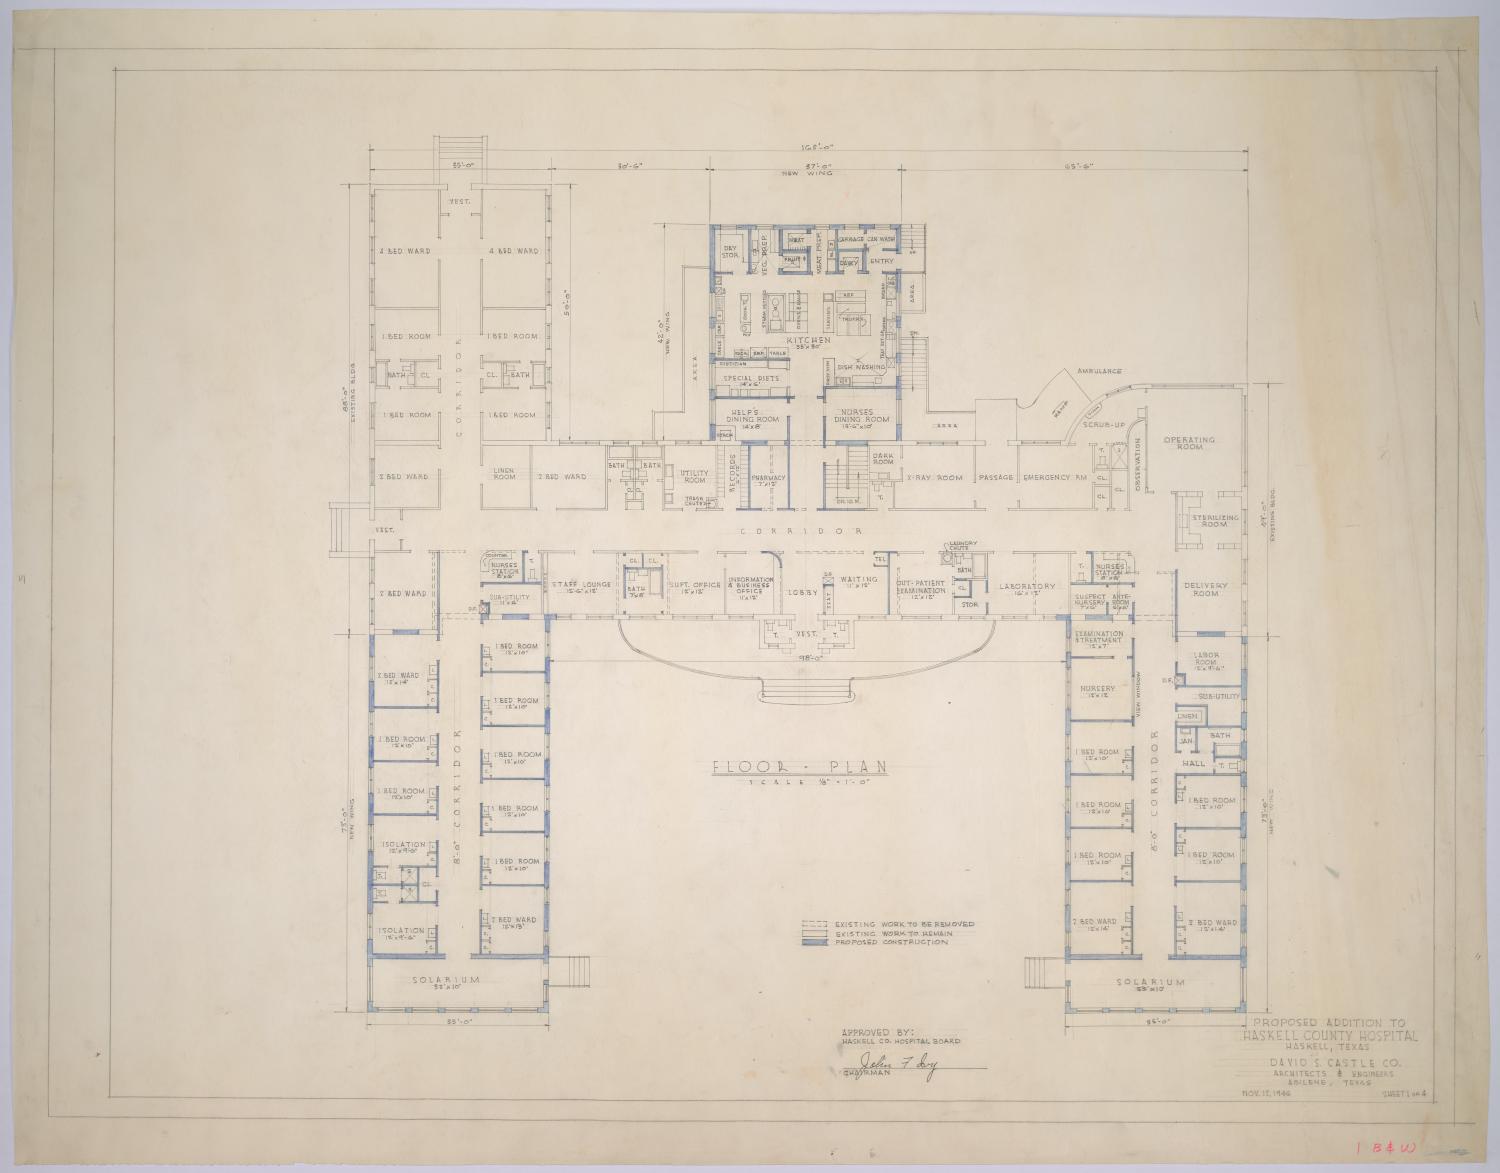 Haskell County Hospital Alterations, Haskell, Texas: Proposed Addition to the Floor Plan
                                                
                                                    [Sequence #]: 1 of 2
                                                